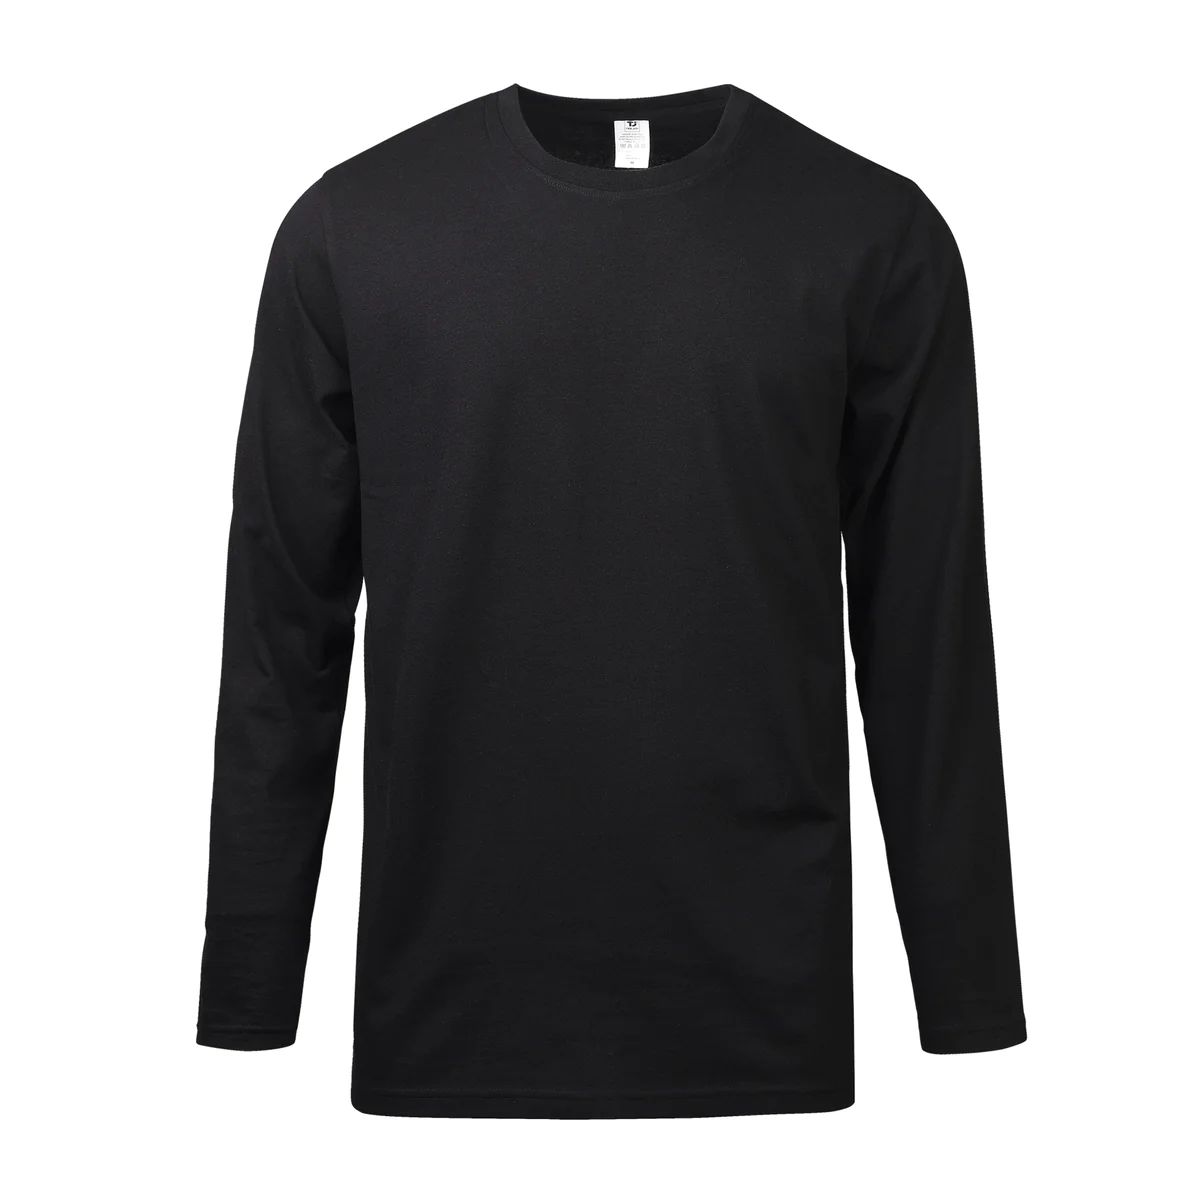 60 Pieces of Men's Classic Crew Neck Long Sleeves T-Shirt Size 2xl